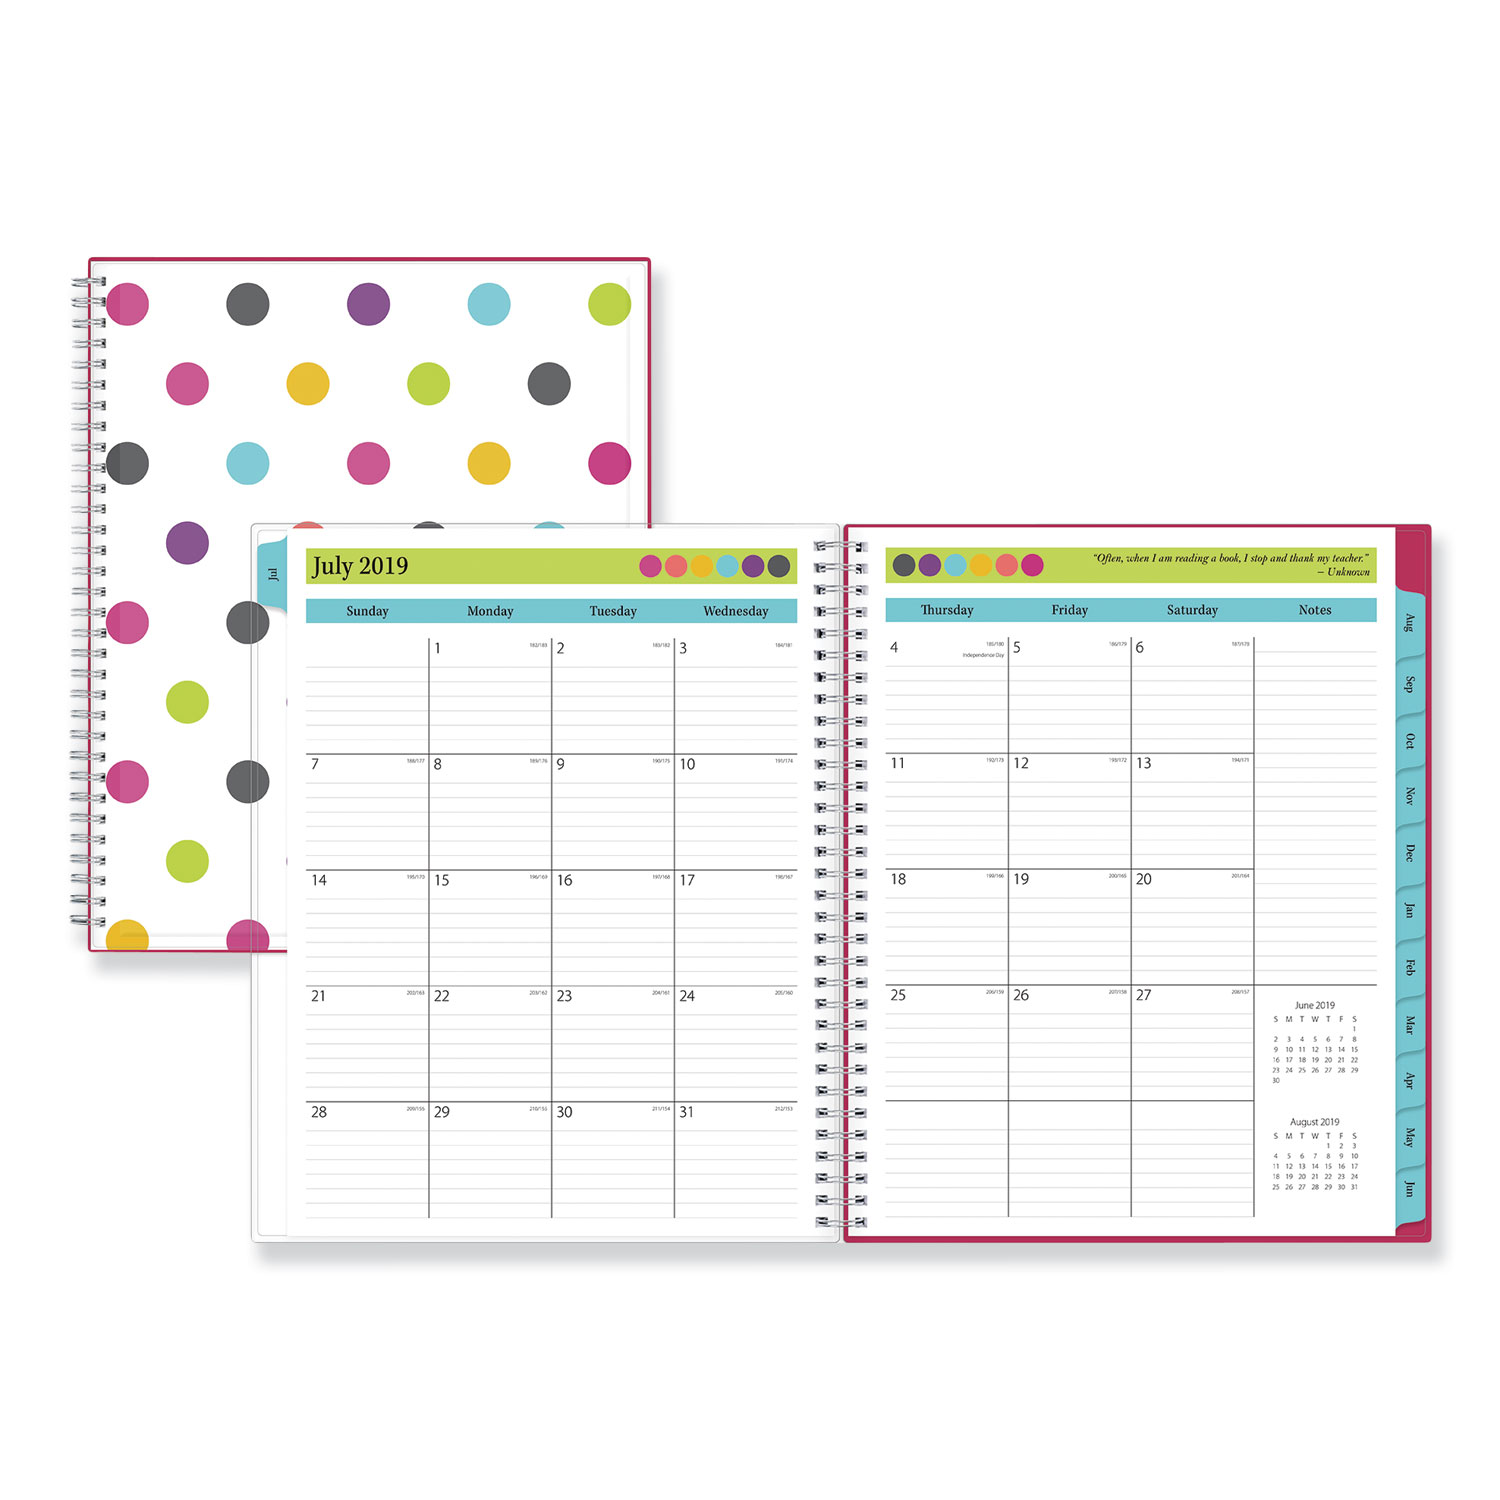  Blue Sky 100330 Teacher Dots Academic Year CYO Weekly/Monthly Planner, 11 x 8.5, Assorted, 2020-2021 (BLS100330) 